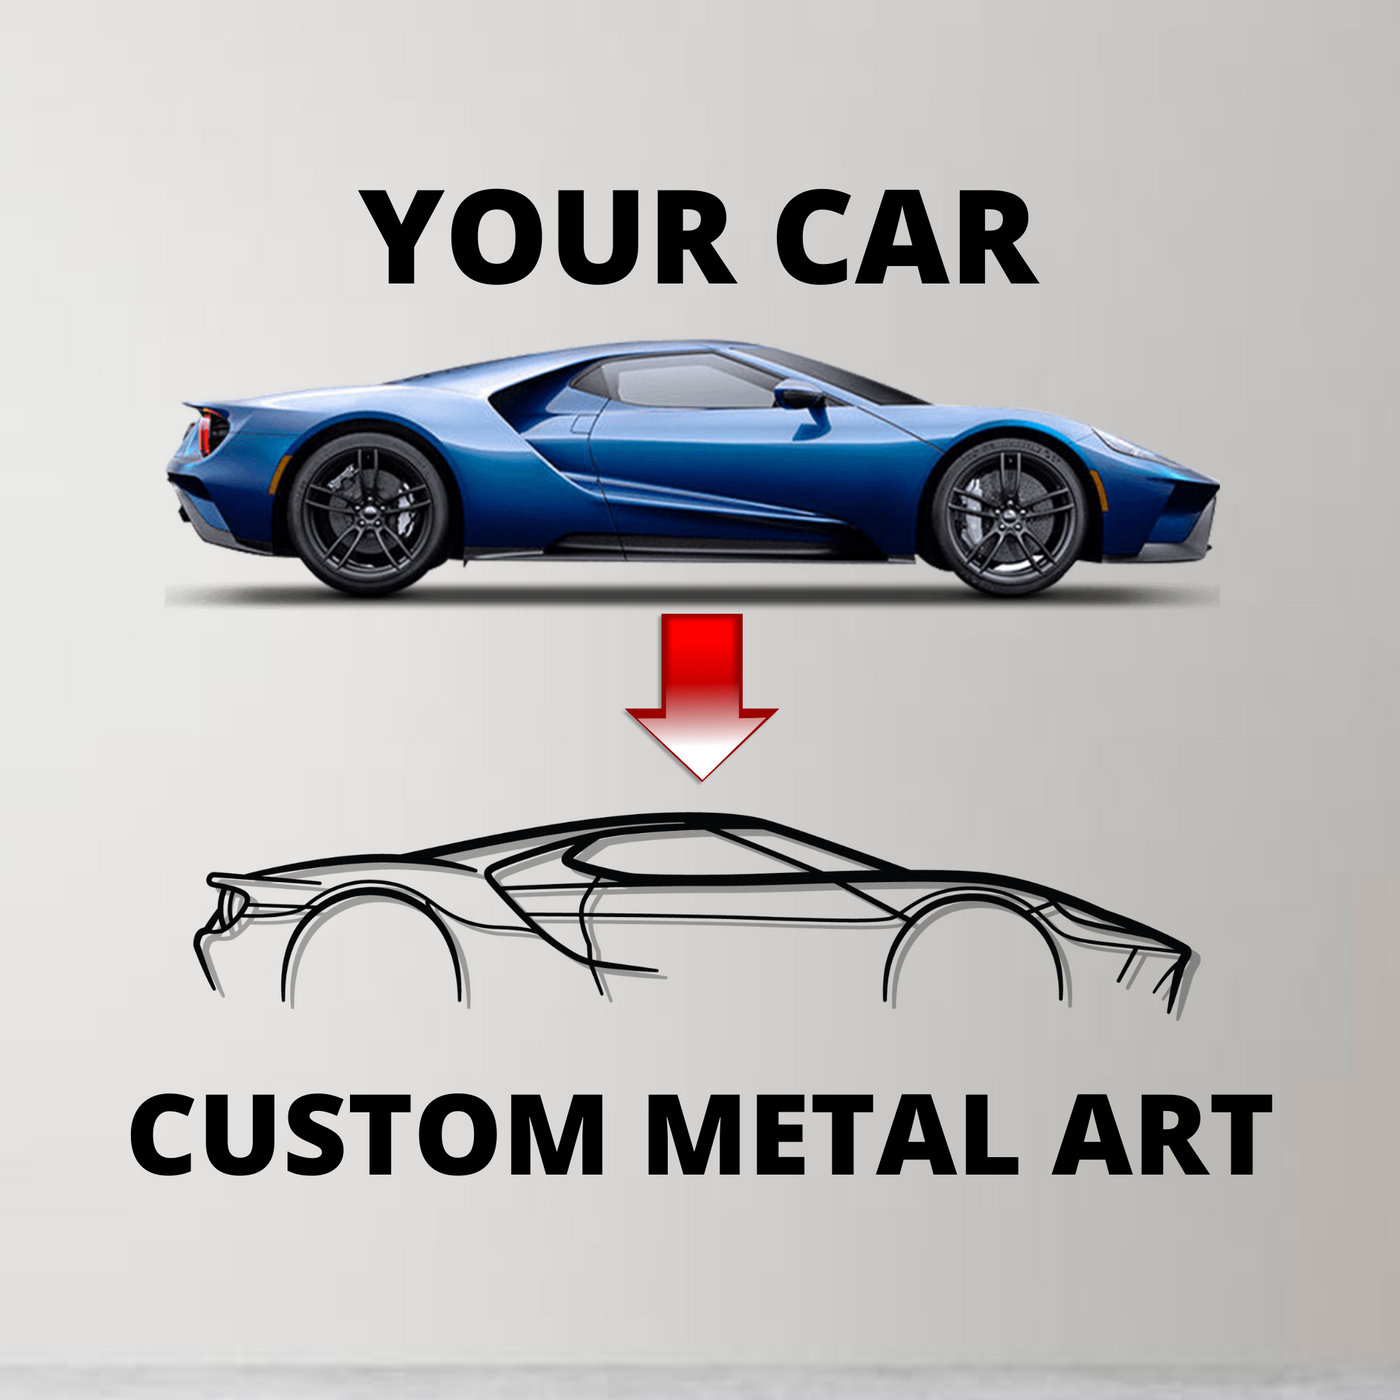 Cayenne Turbo S 2009 Detailed Silhouette Metal Wall Art